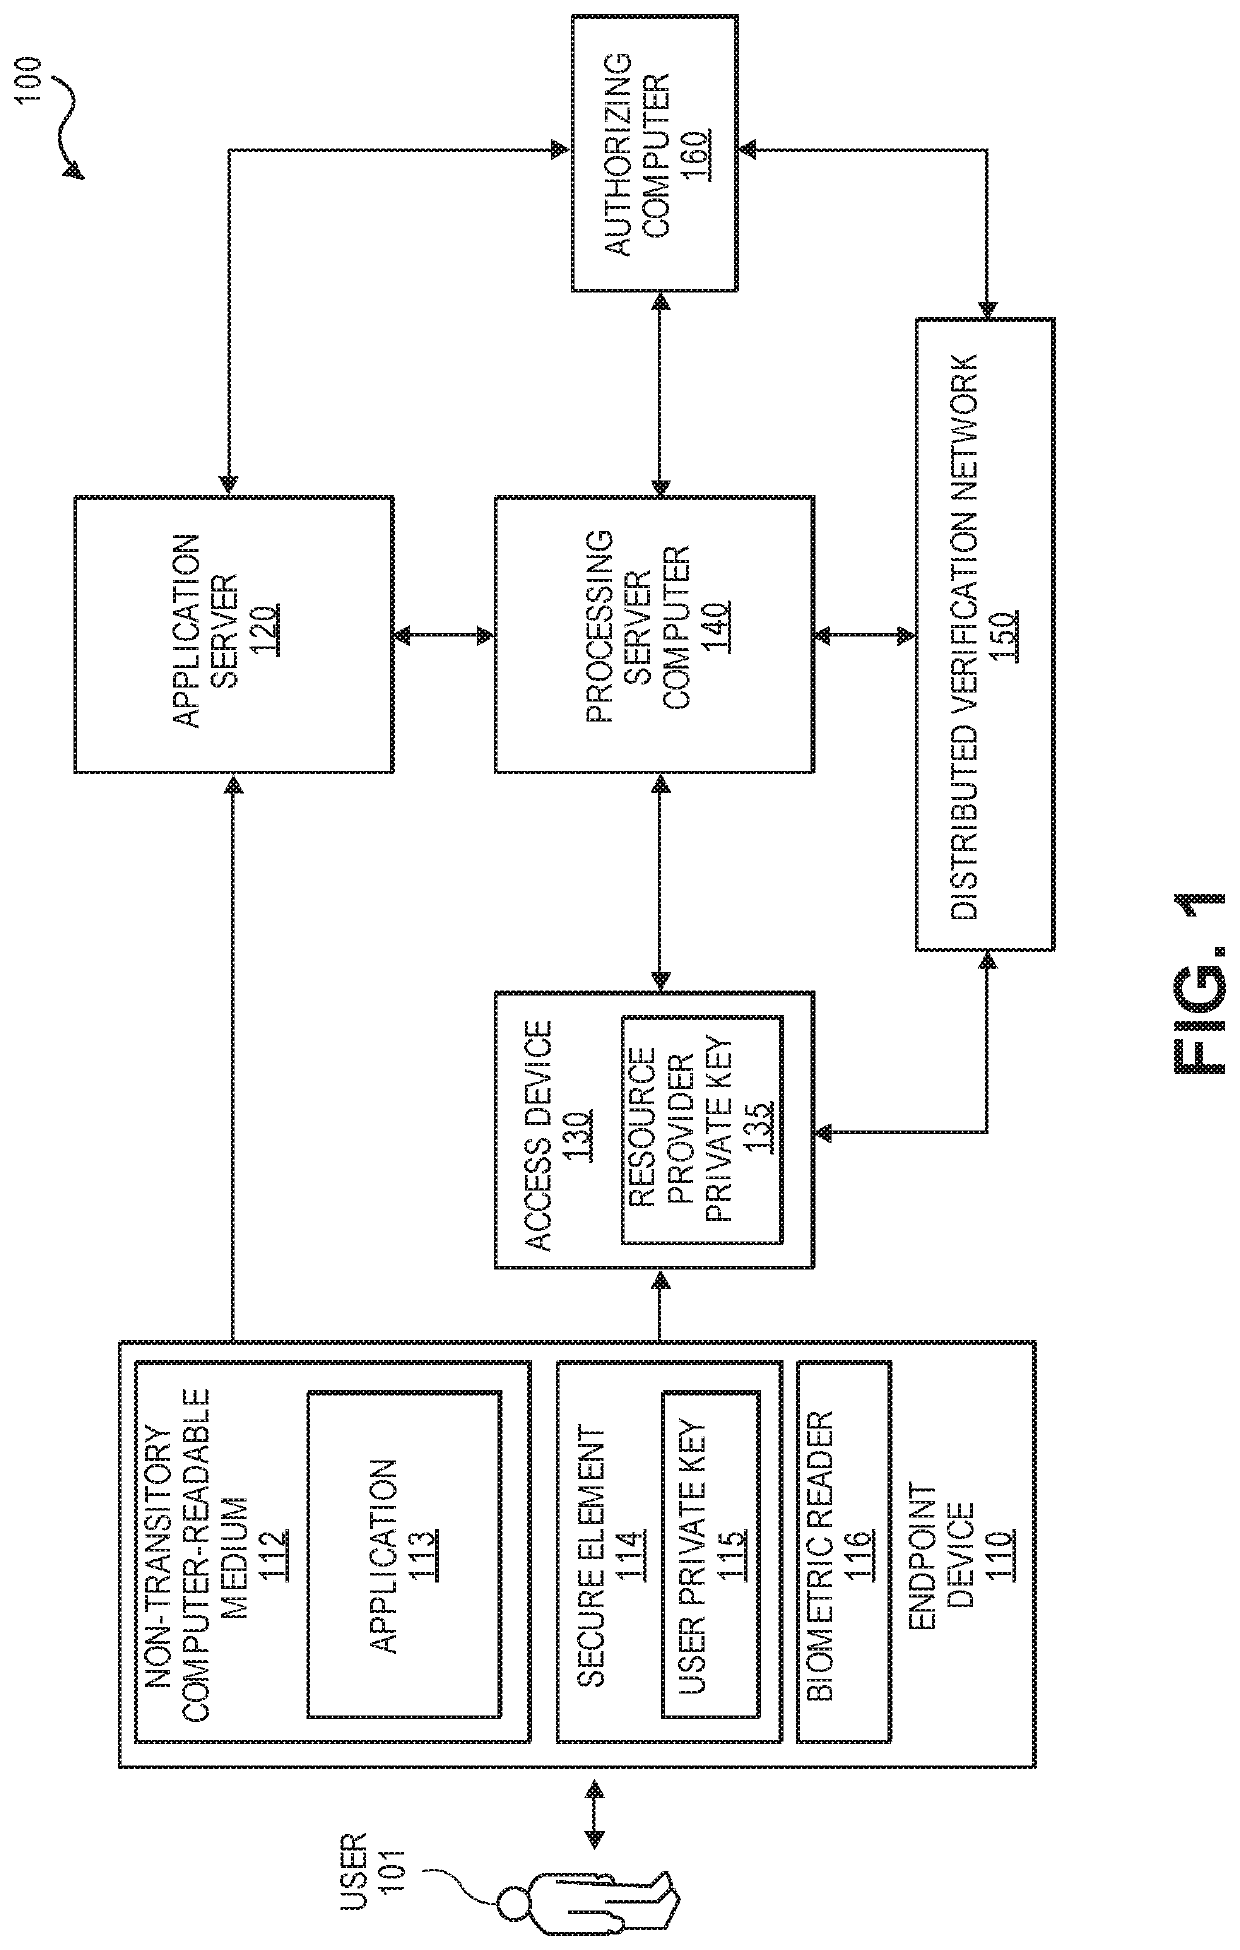 System and method for securely processing an electronic identity